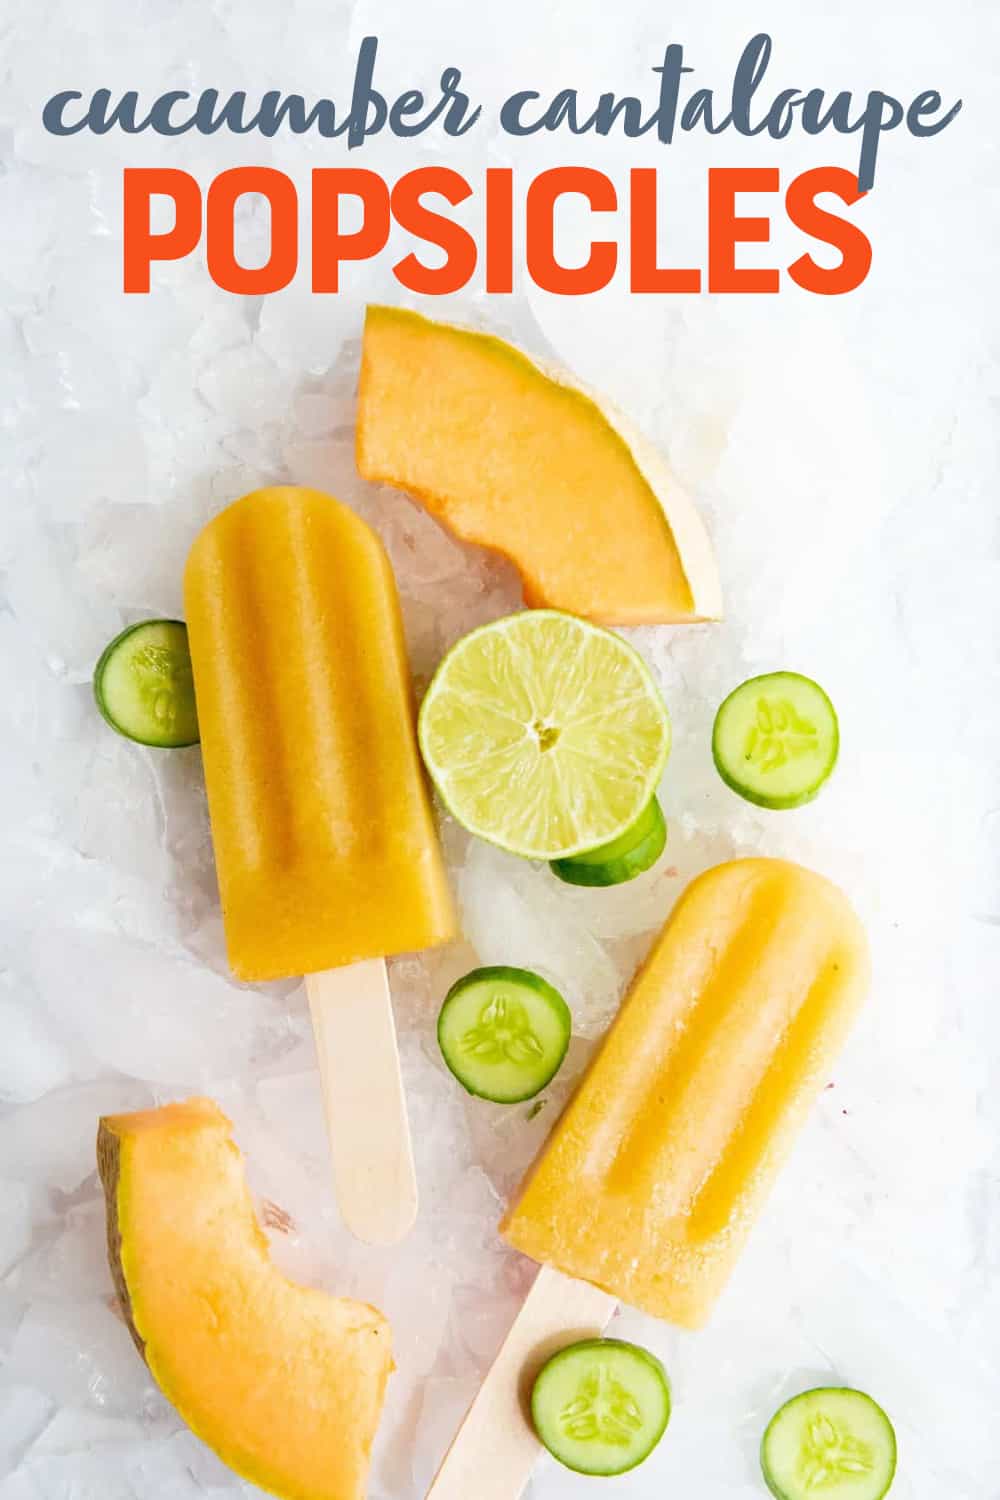 Overhead of cucumber cantaloupe popsicles lying on ice with slices of fresh cantaloupe, cucumbers, and lime. A text overlay reads, "Cucumber Cantaloupe Popsicles."